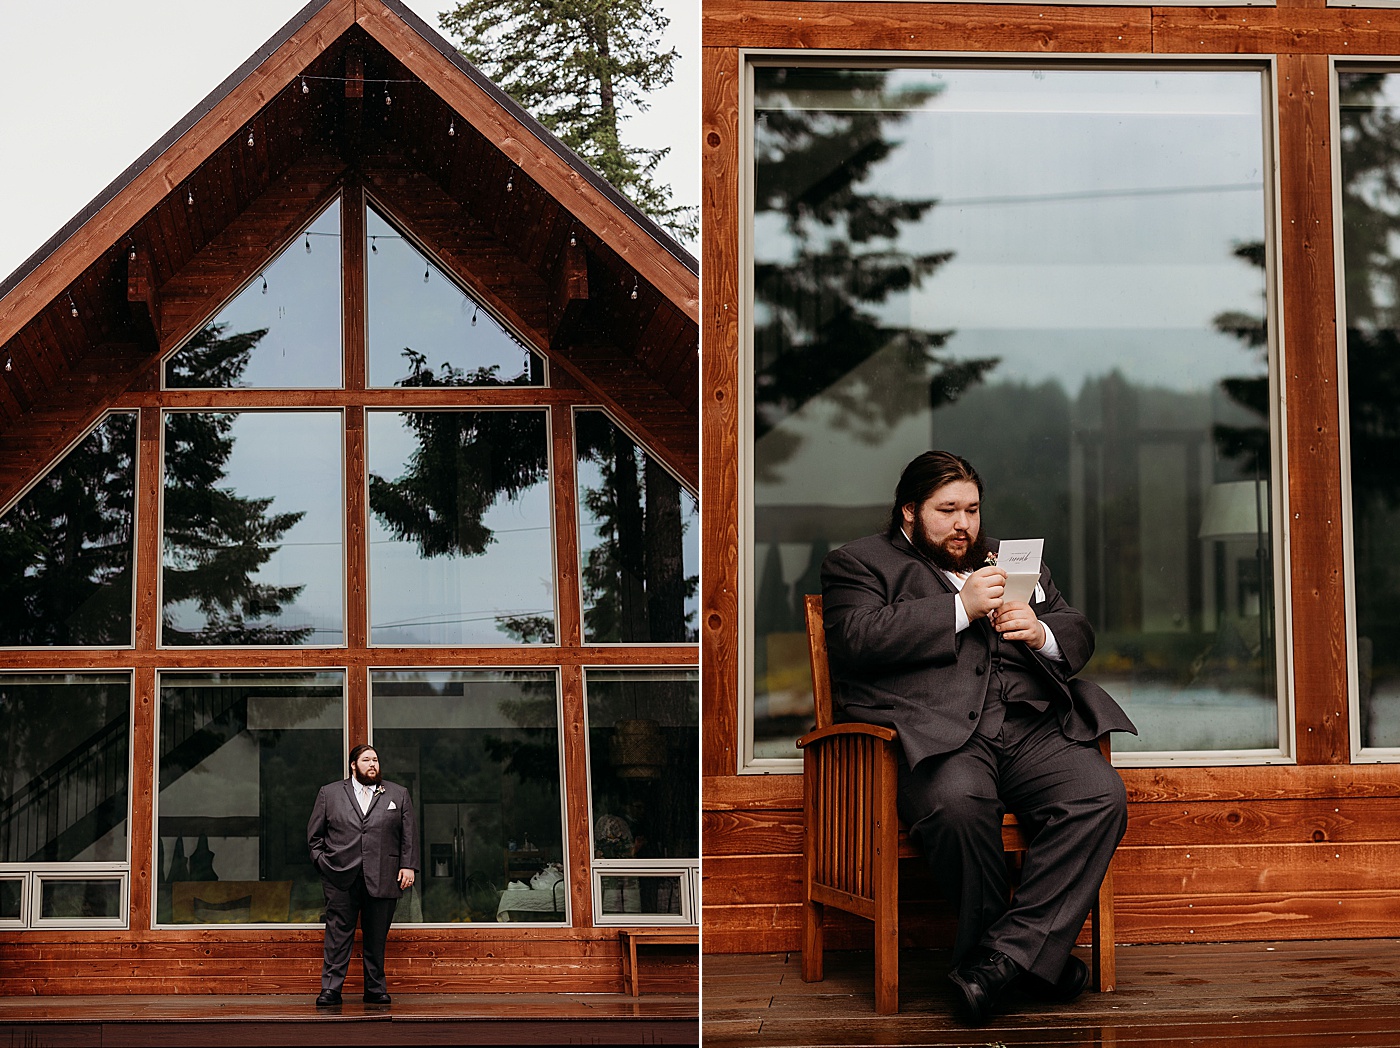 Groom reading letter from his bride | Photo by Megan Montalvo Photography